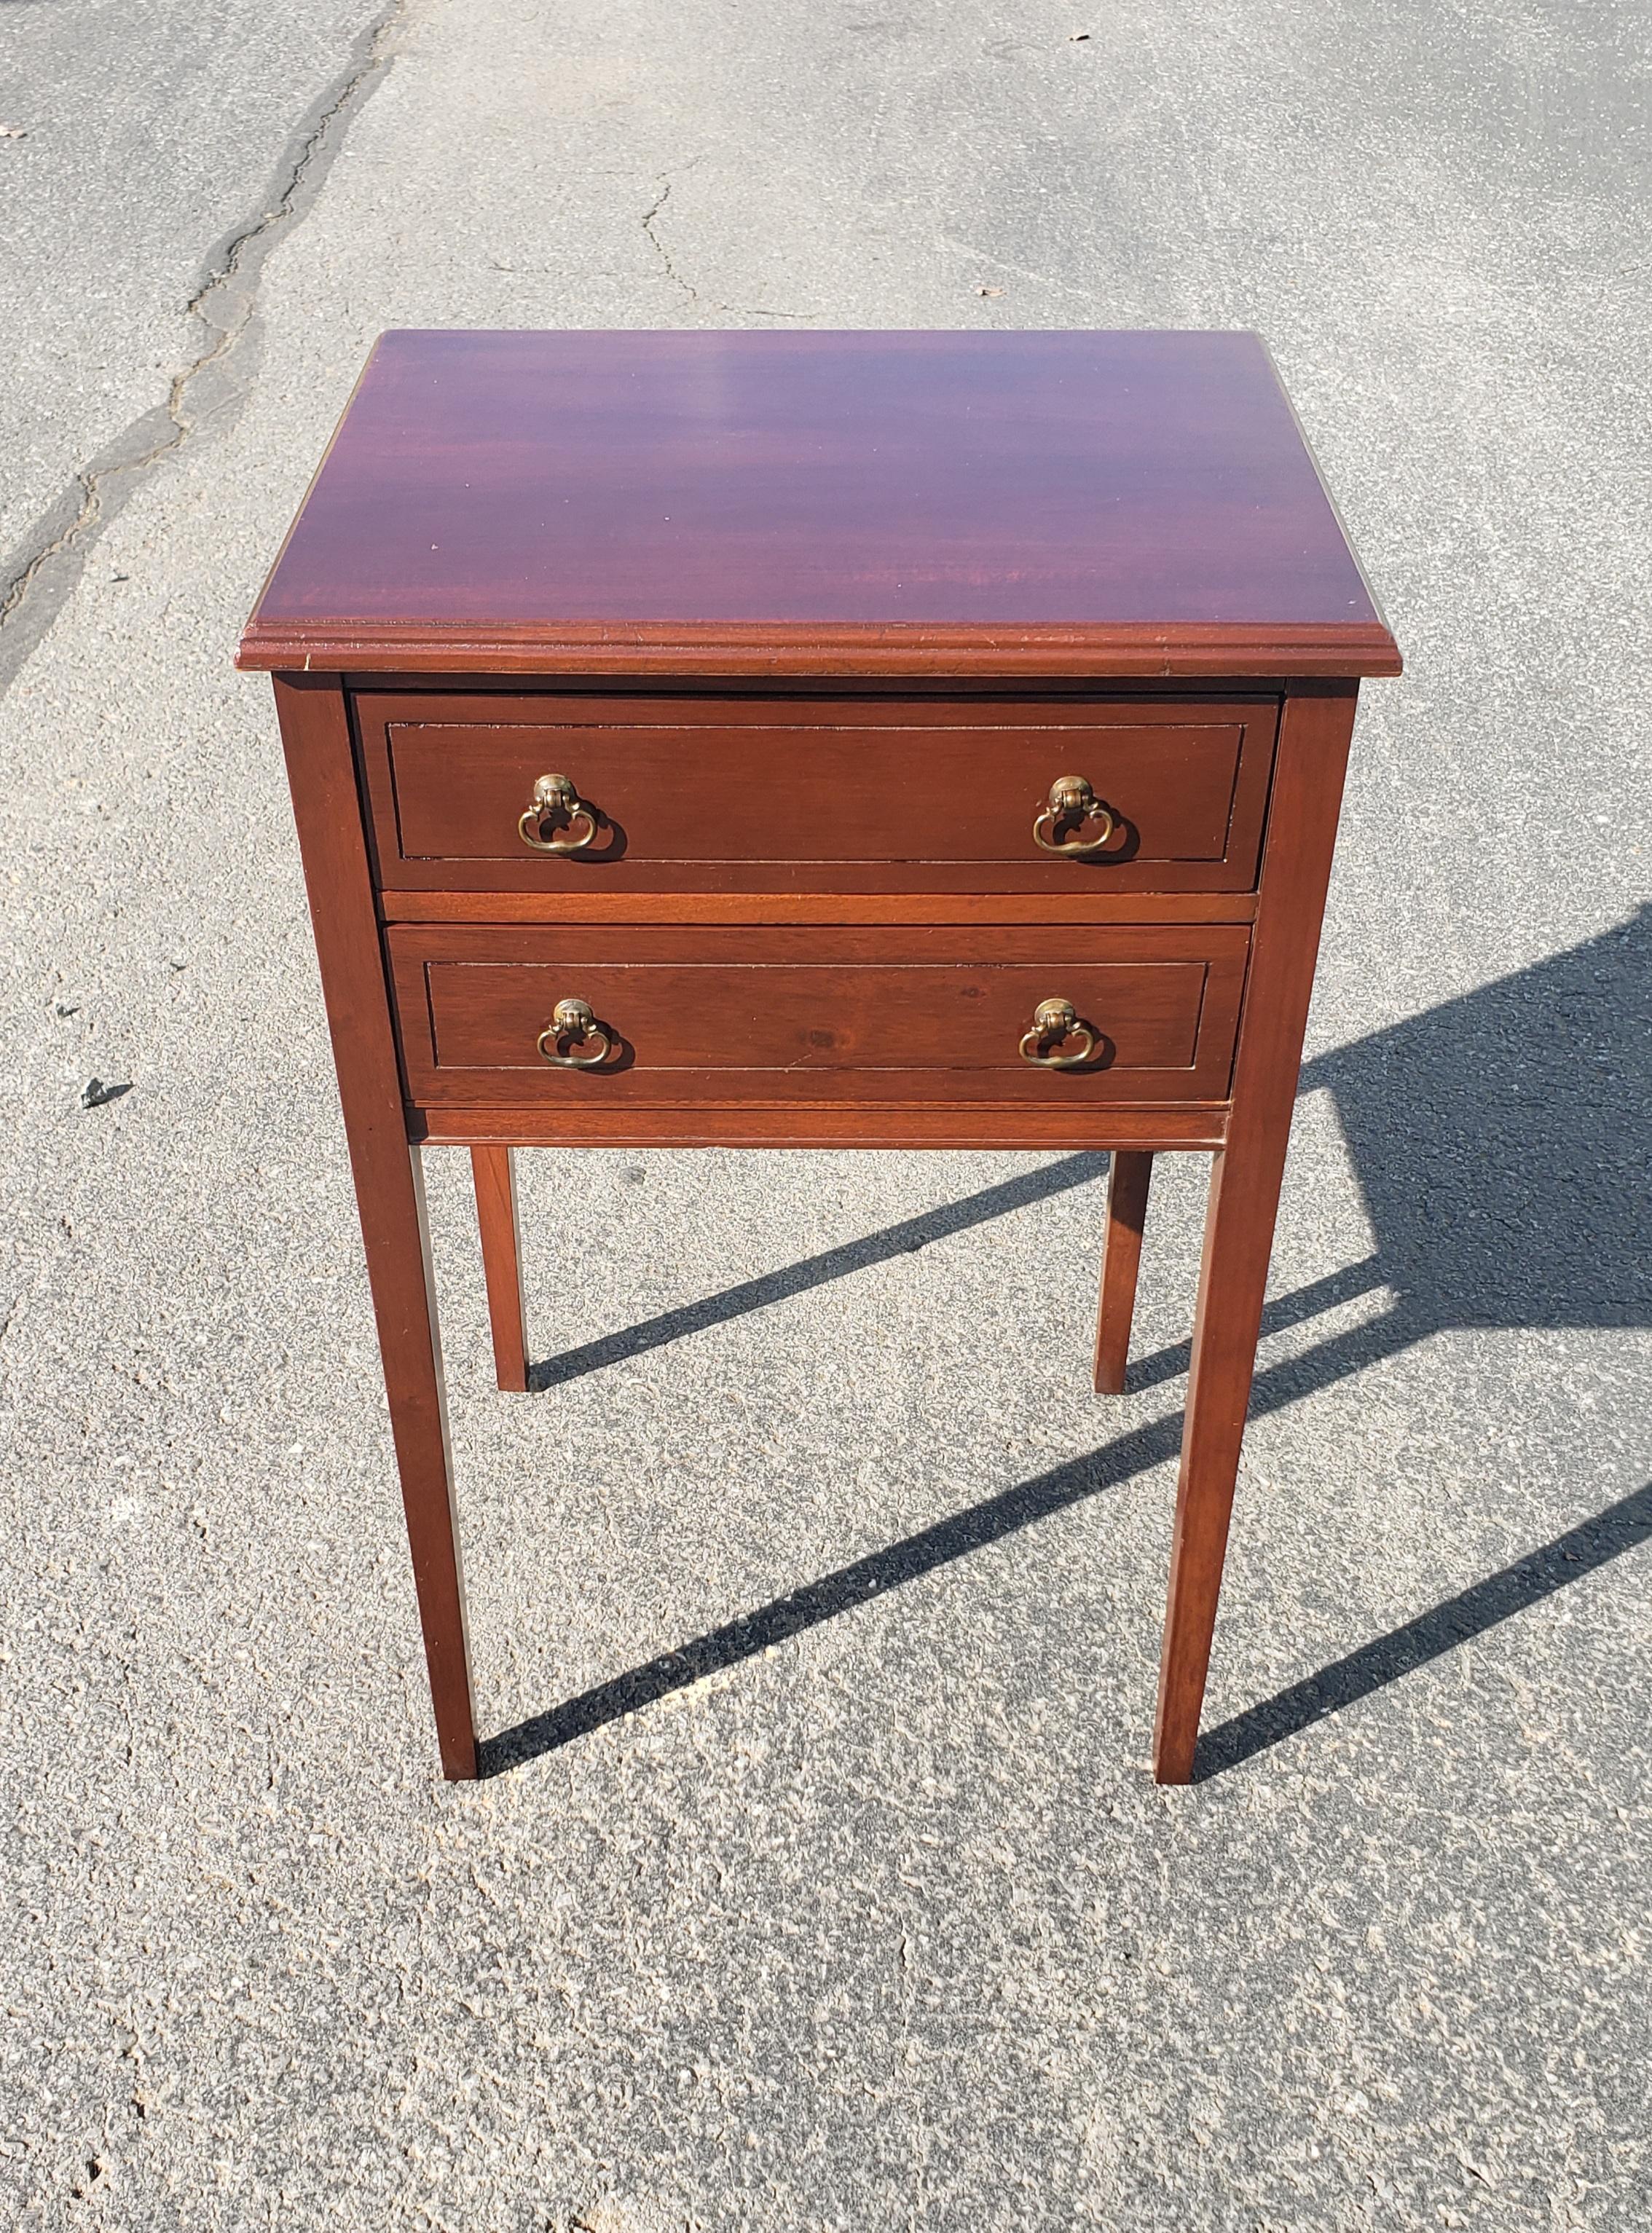 20th Century 1940s Regency Two-Drawers Mahogany Side Tables by Mersman Furniture, a Pair For Sale